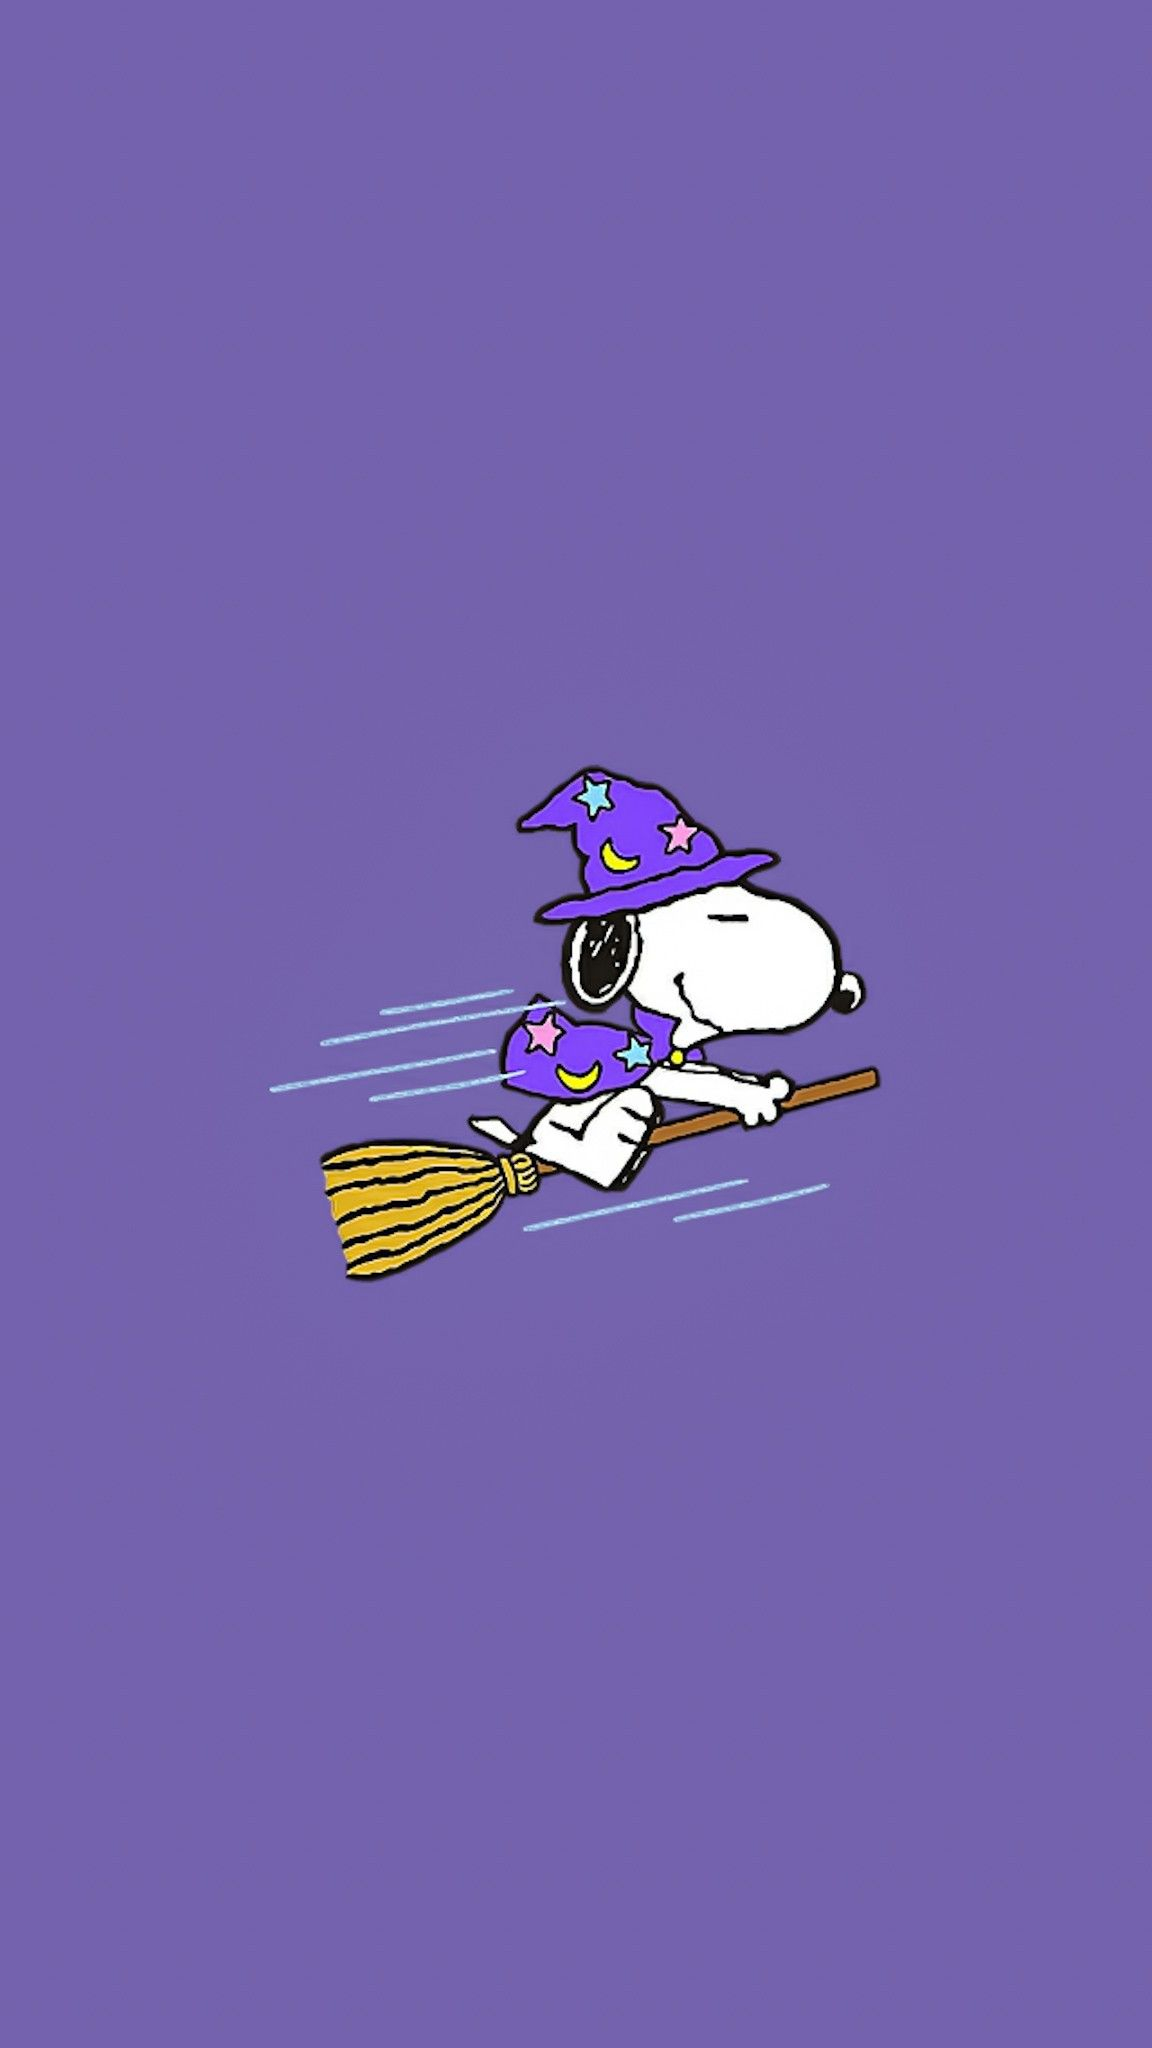 1152x2048 Pin by Aekkalisa on Snoopy | Snoopy wallpaper, Snoopy halloween, Halloween wallpaper iphone